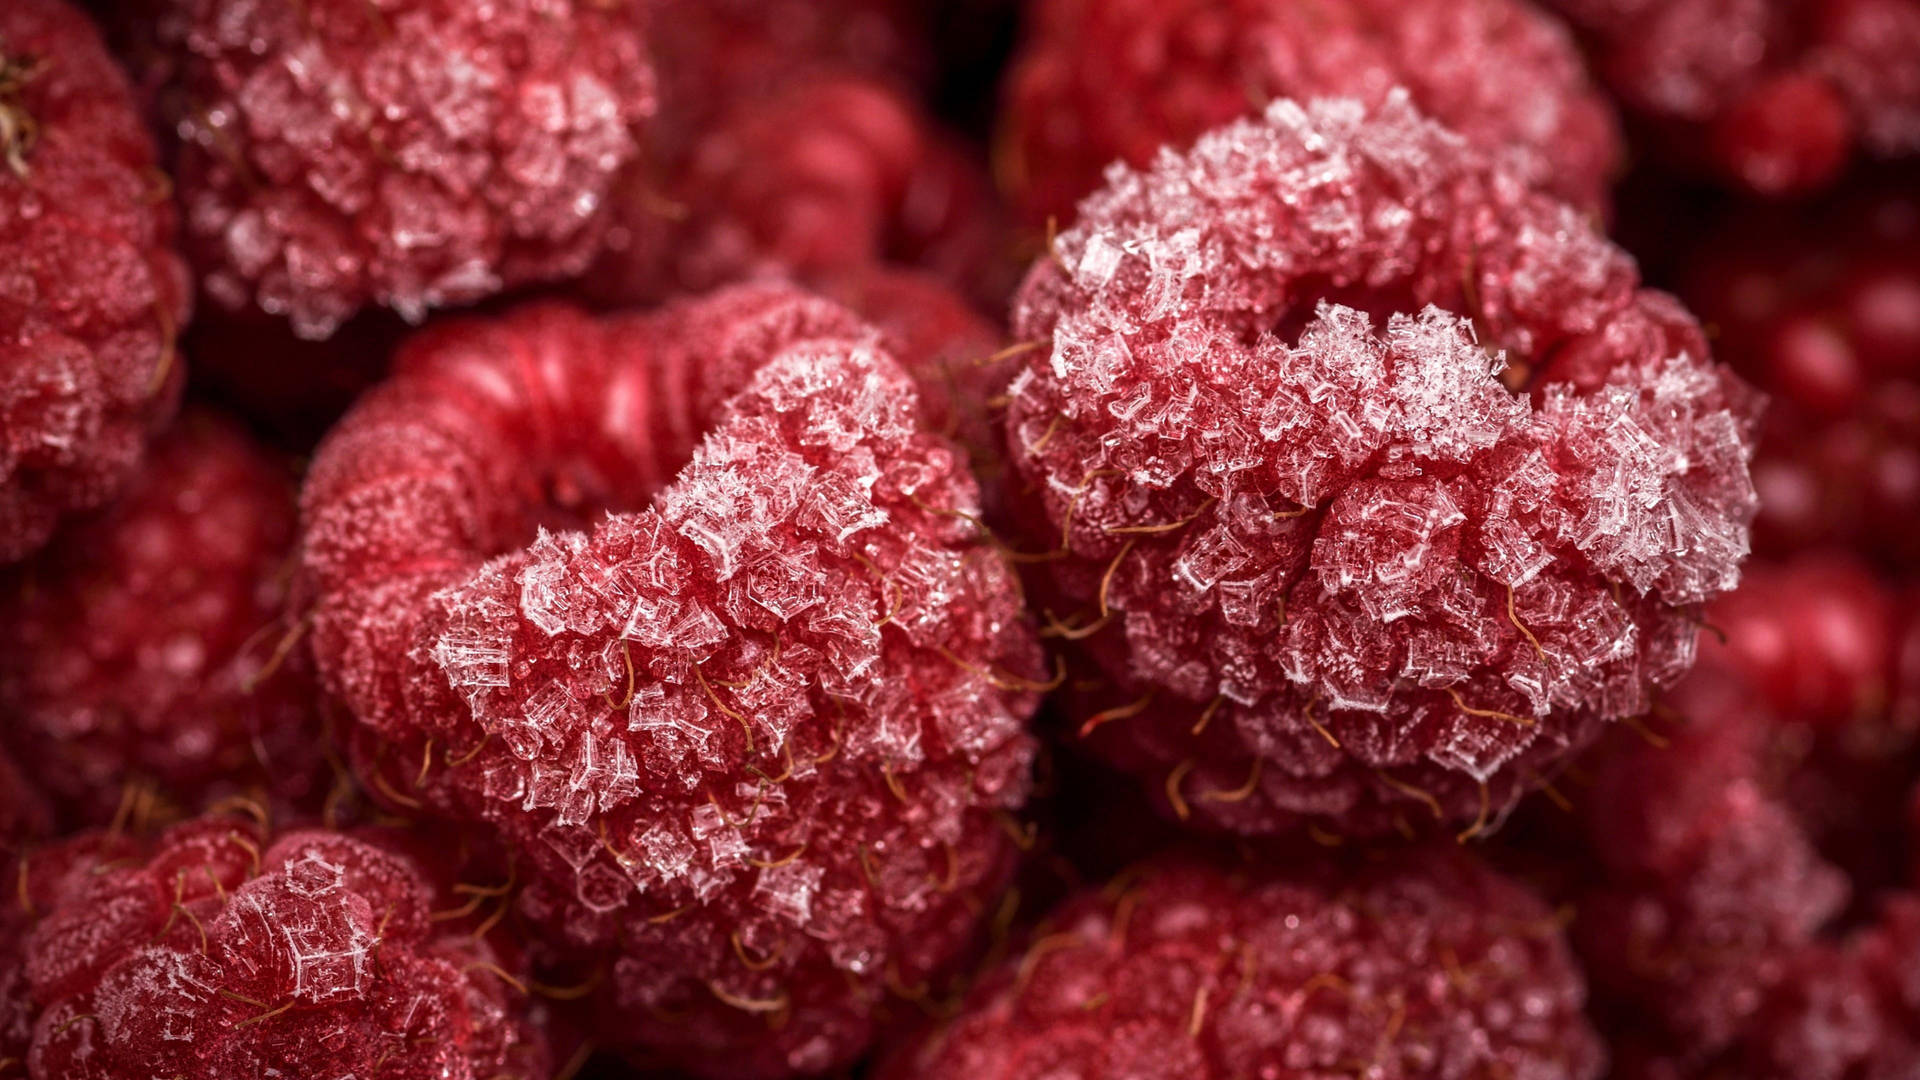 Up-close View of Fresh, Ripe Red Berries Wallpaper